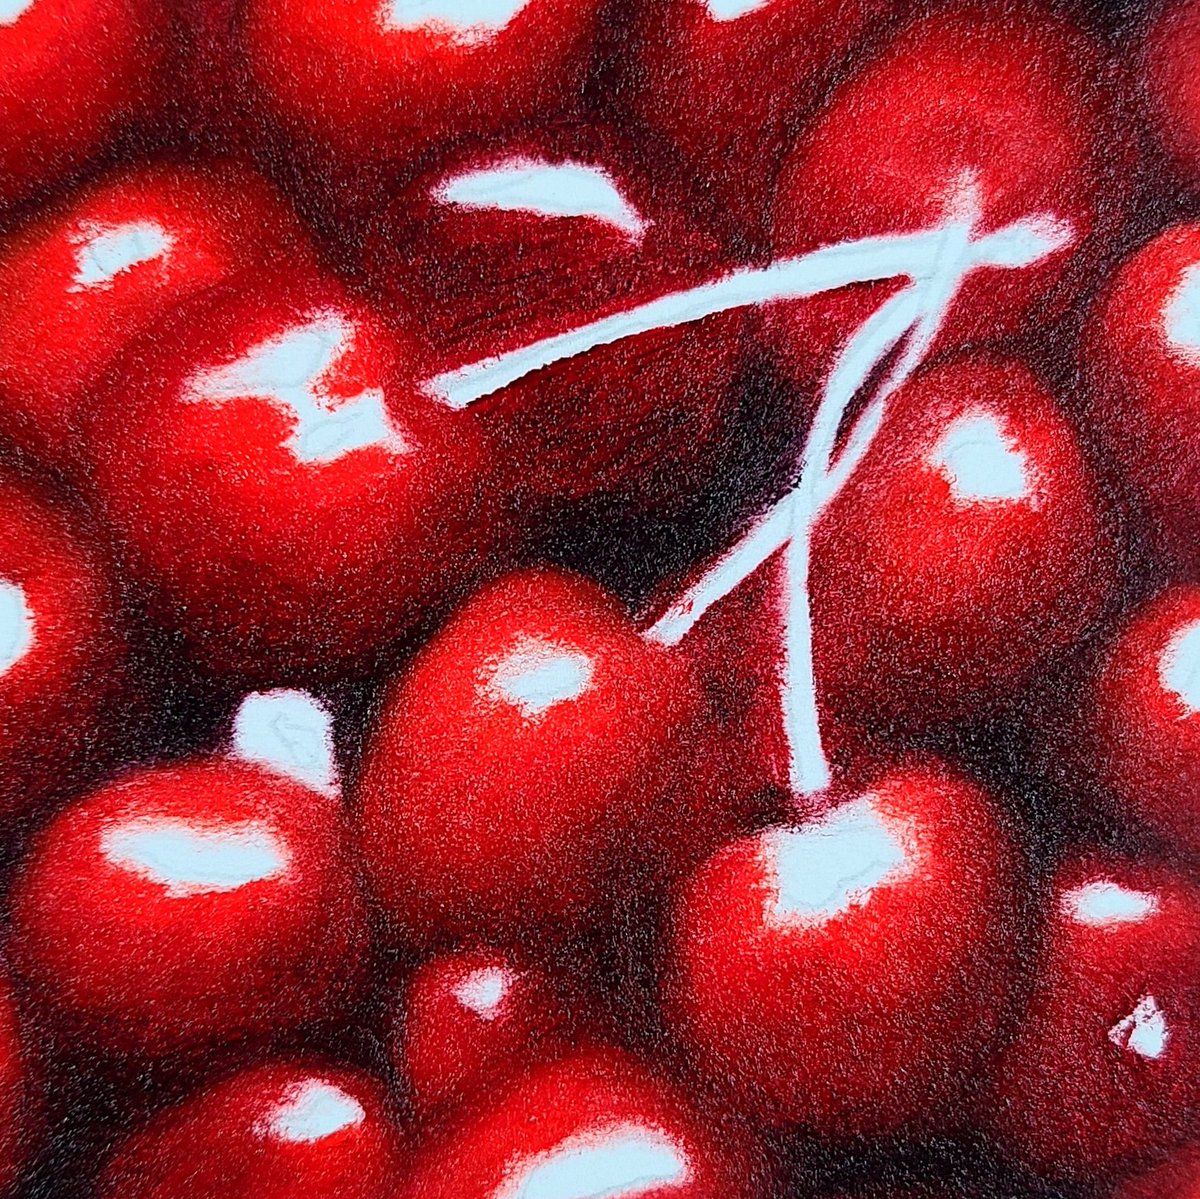 He had the biggest cherry trees I've ever seen and the dark red cherries were so delicious!

#oilpainting #painting #bcartist #vancouverisland #canadianartist #oilpaintingart #art #cherrypie #cherries #cherry #cherrypainting #artist #dailyart #dailyartwork #sketch #minipainting